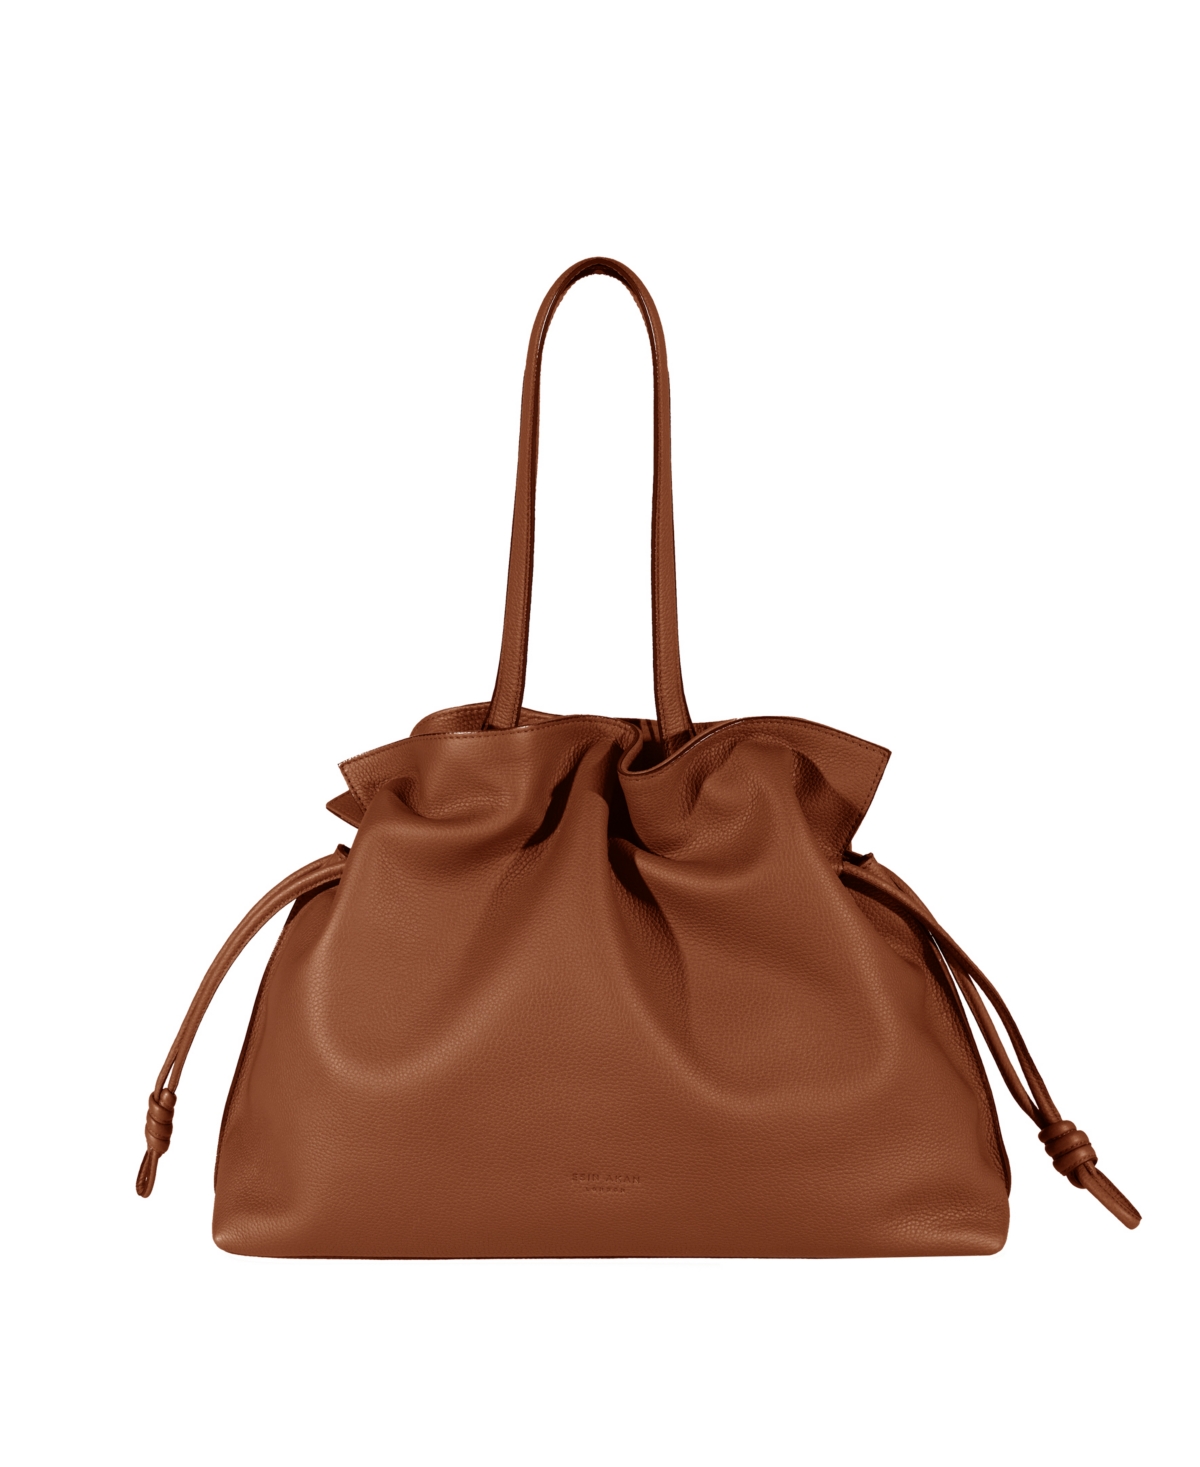 Women's Emma Leather Tote Bag - Brown